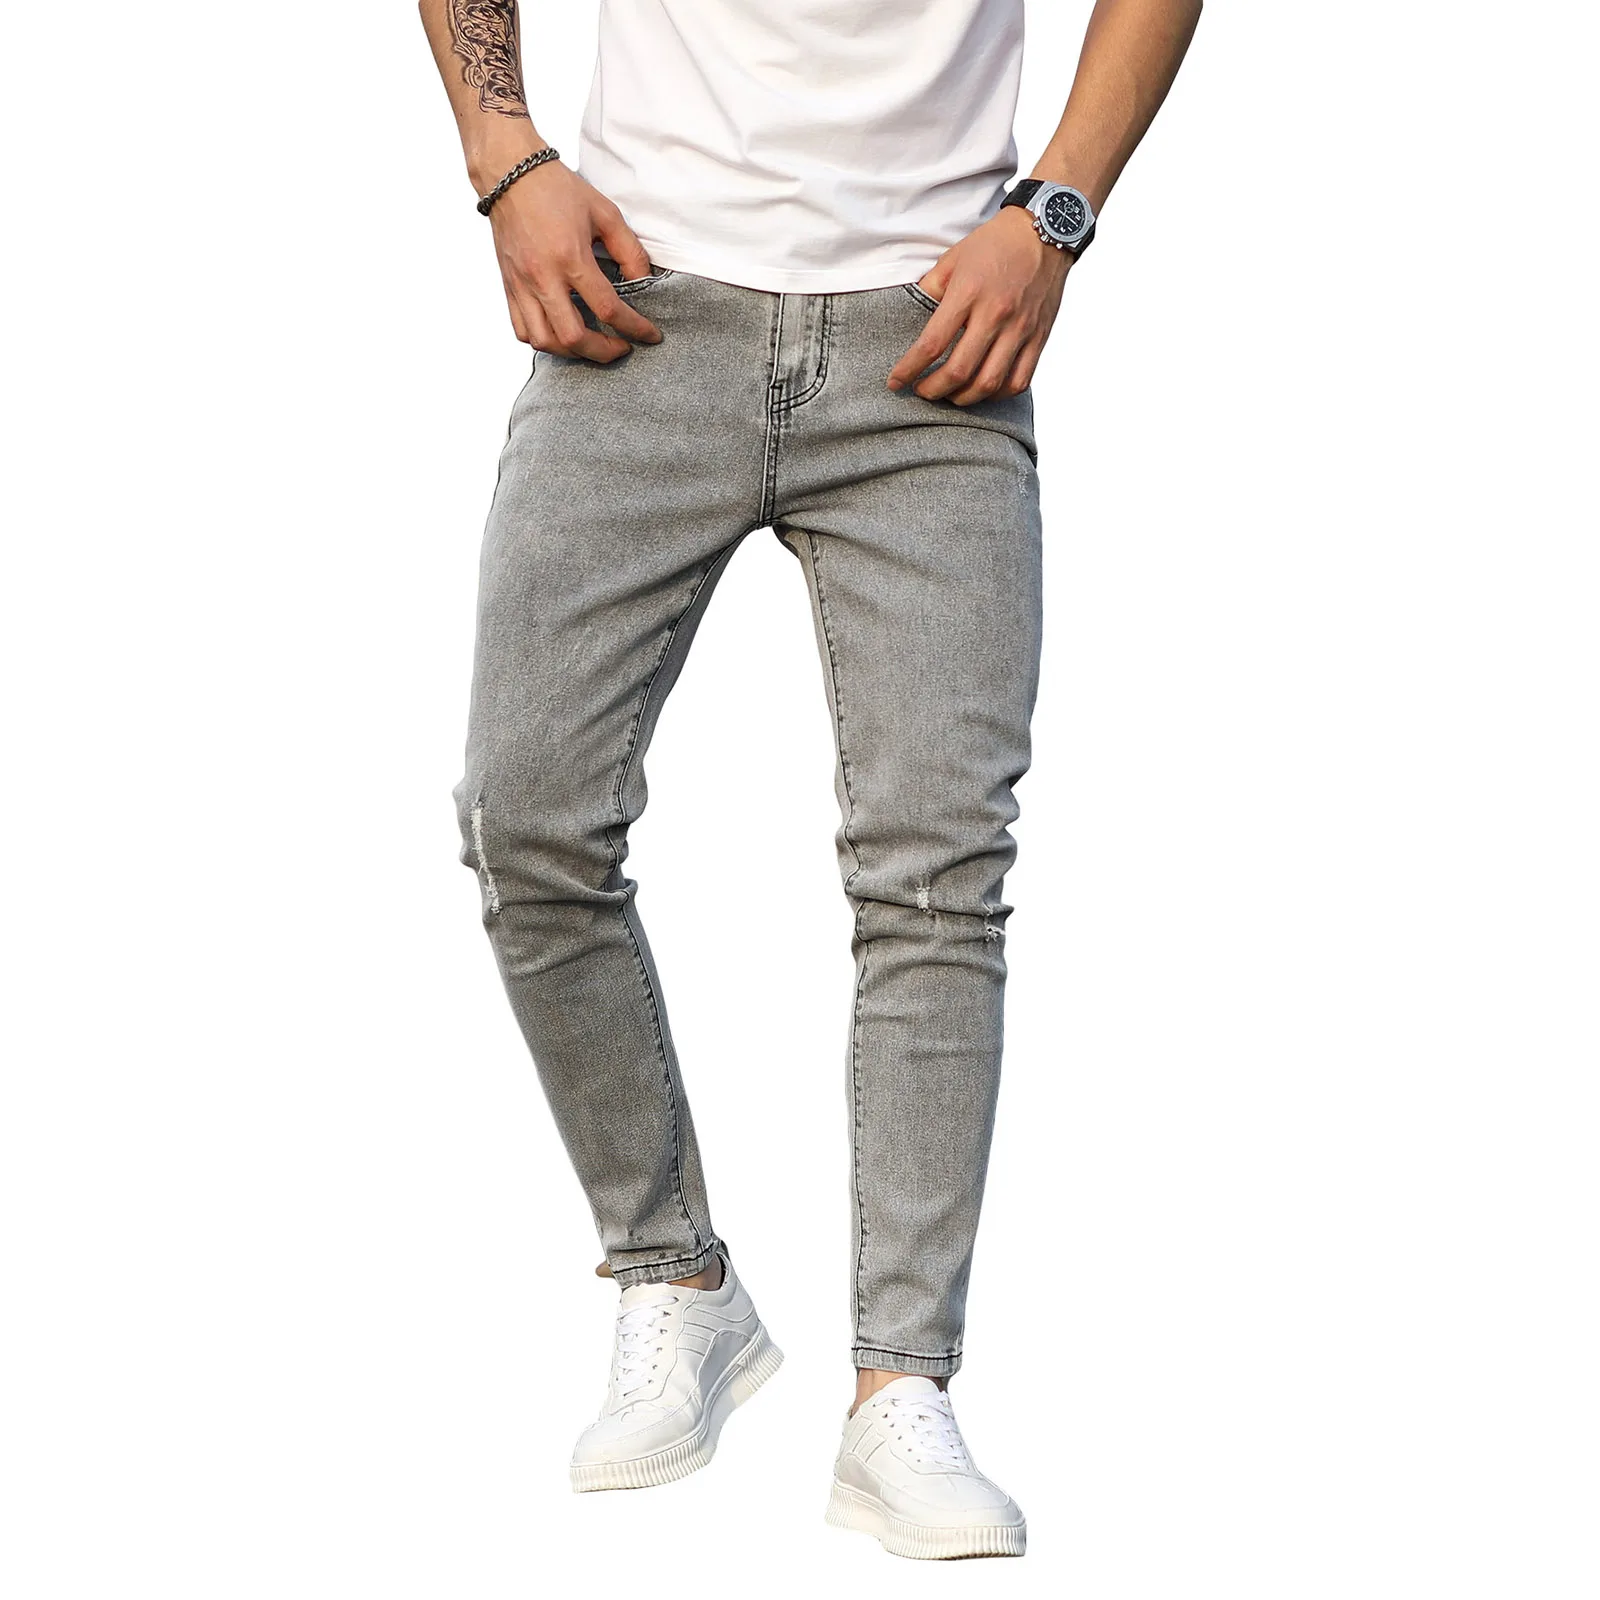 

Men's Skinny Ripped Denim Pants, Mid Rise Tapered Leg Washed Distressed Stretch Jeans